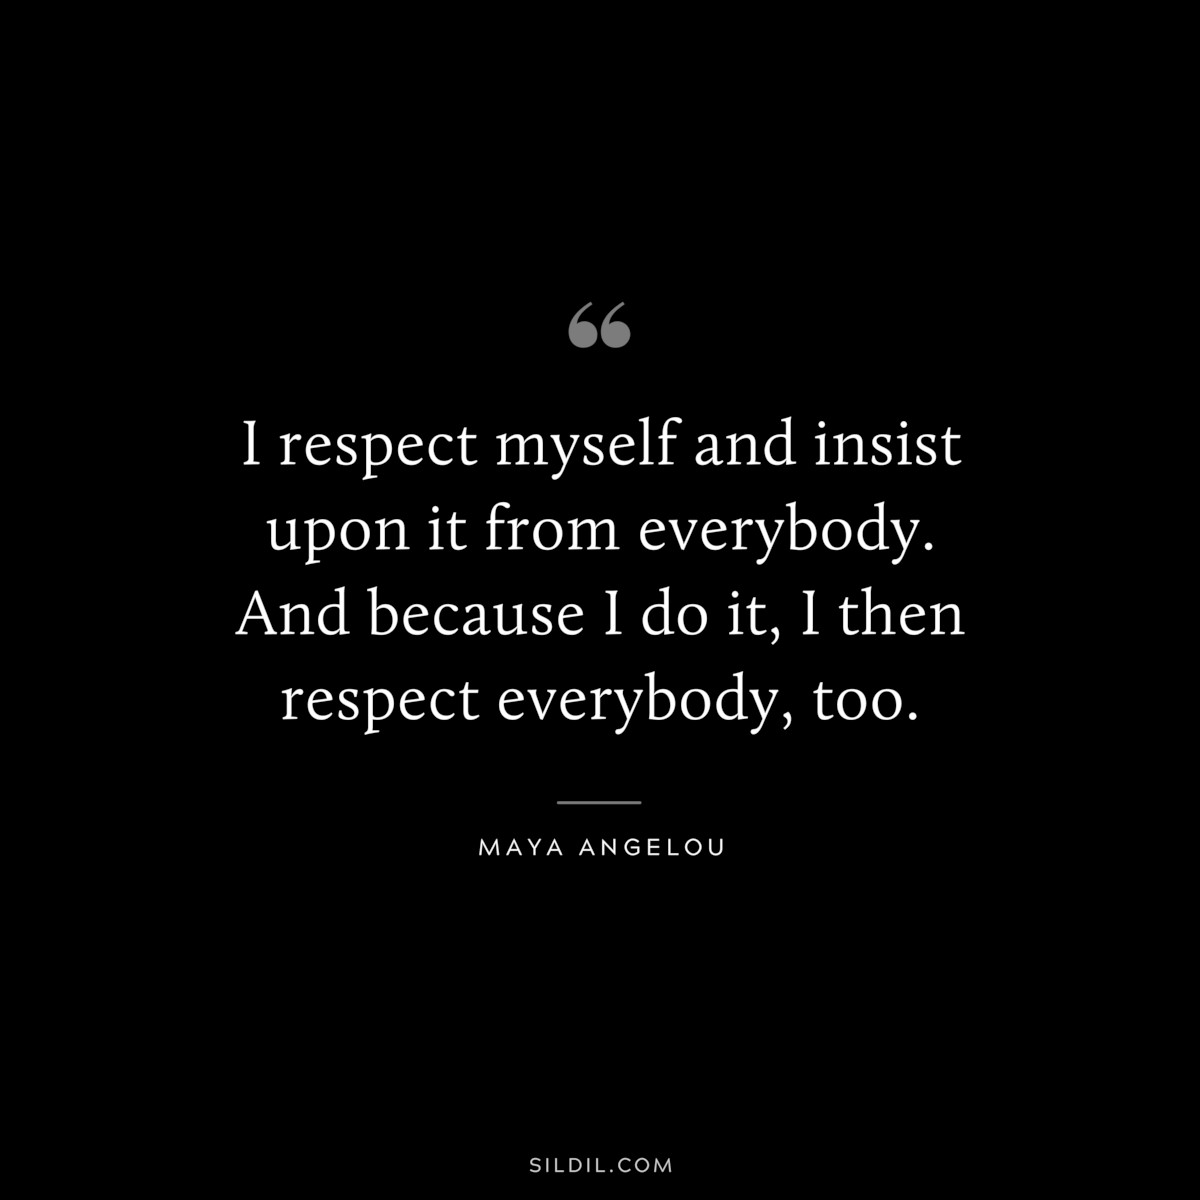 I respect myself and insist upon it from everybody. And because I do it, I then respect everybody, too. ― Maya Angelou